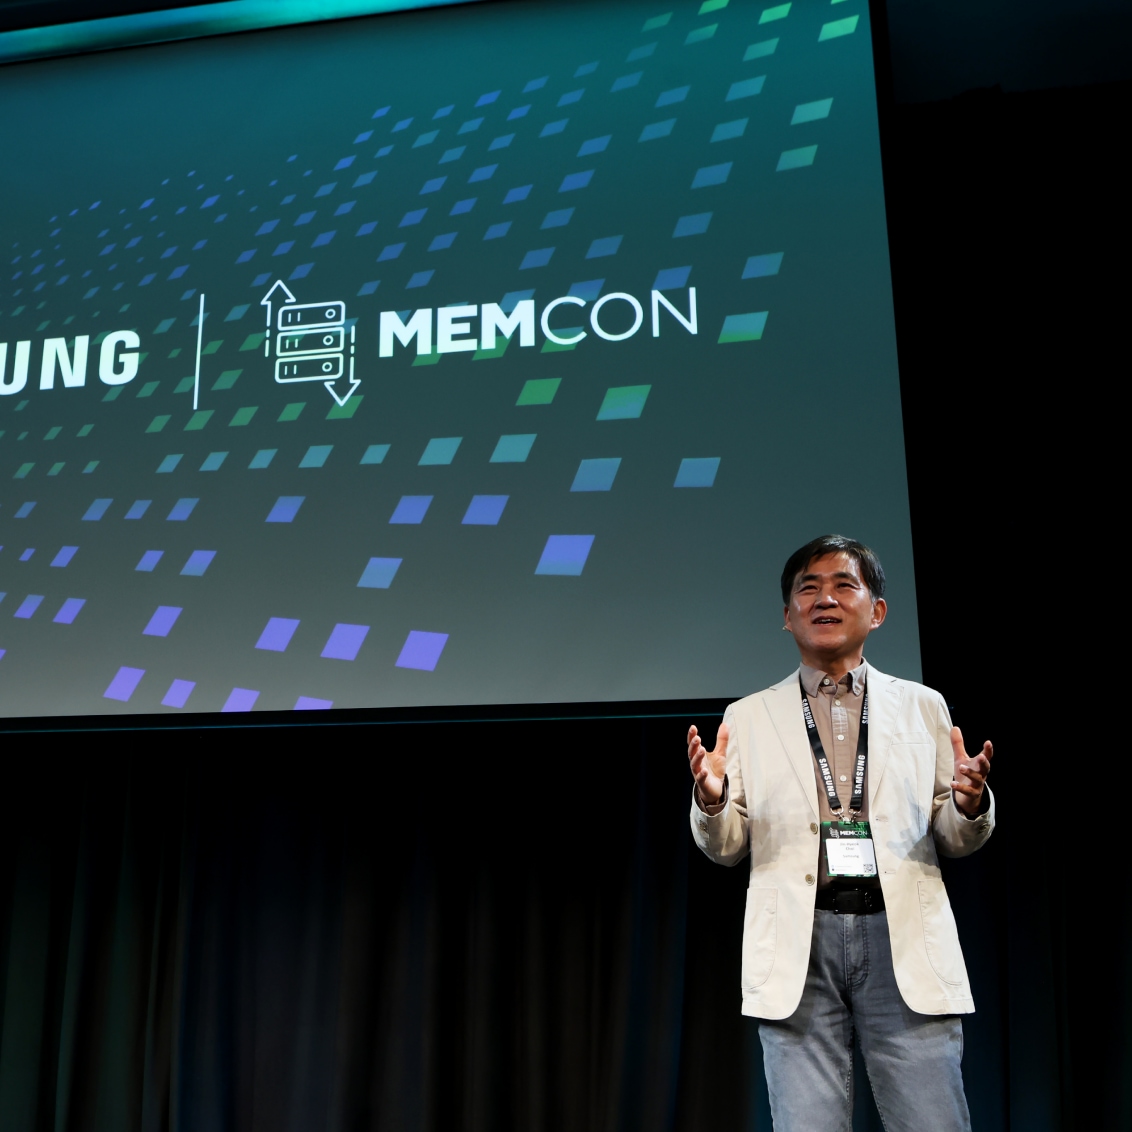 A man presenting at a conference with the word 'MEMCON' on the screen behind him.